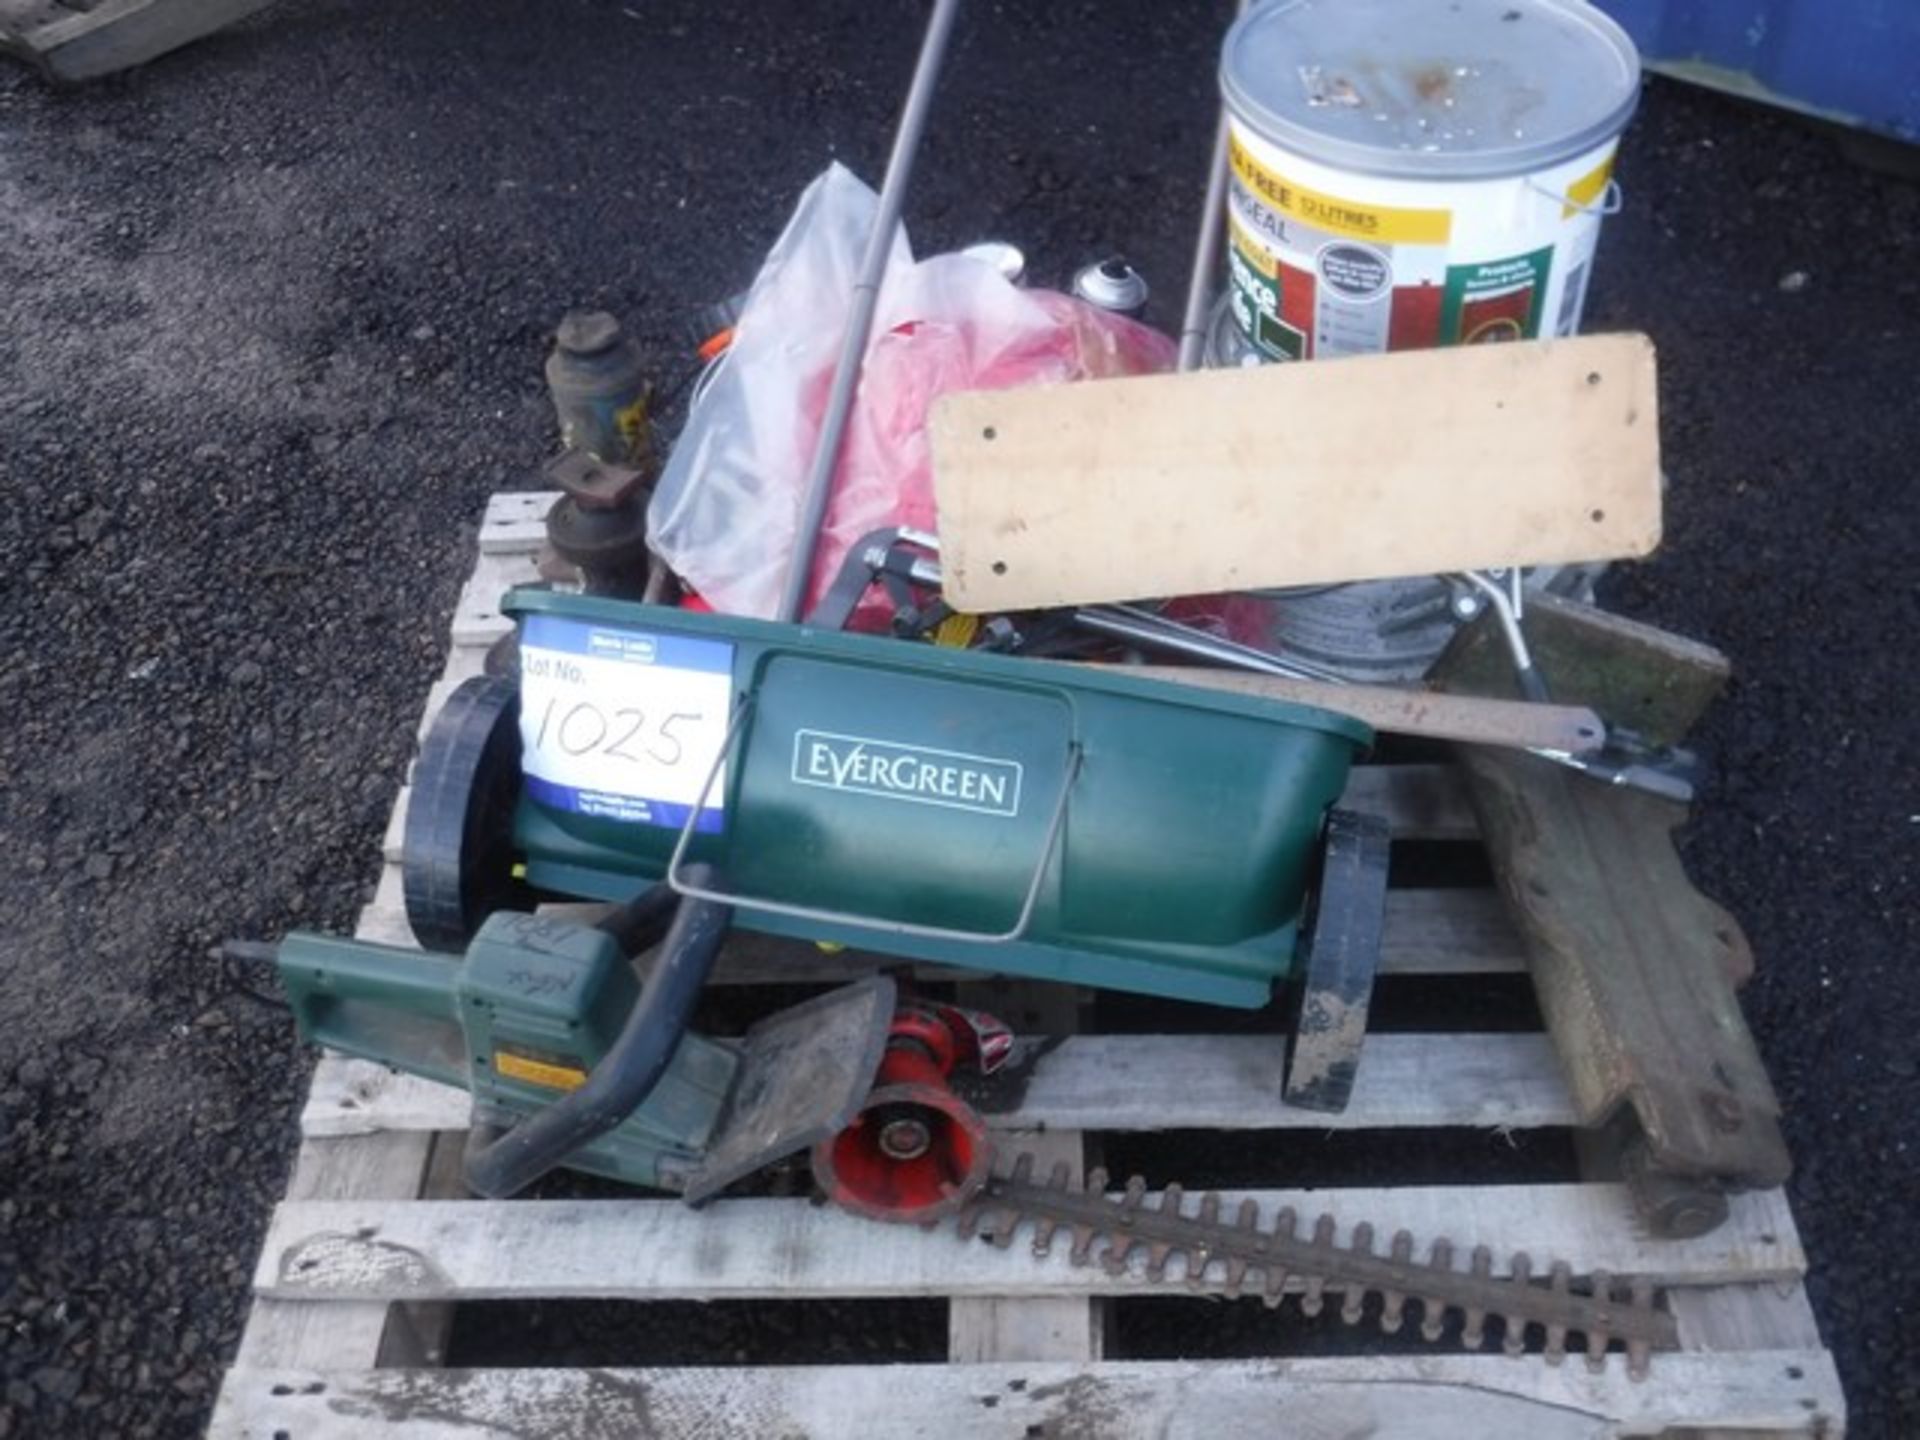 VARIOUS TOOLS - LAWN SPREADER, JACKS, VICE, DRUMS OF FENCE PAINT - Image 5 of 5